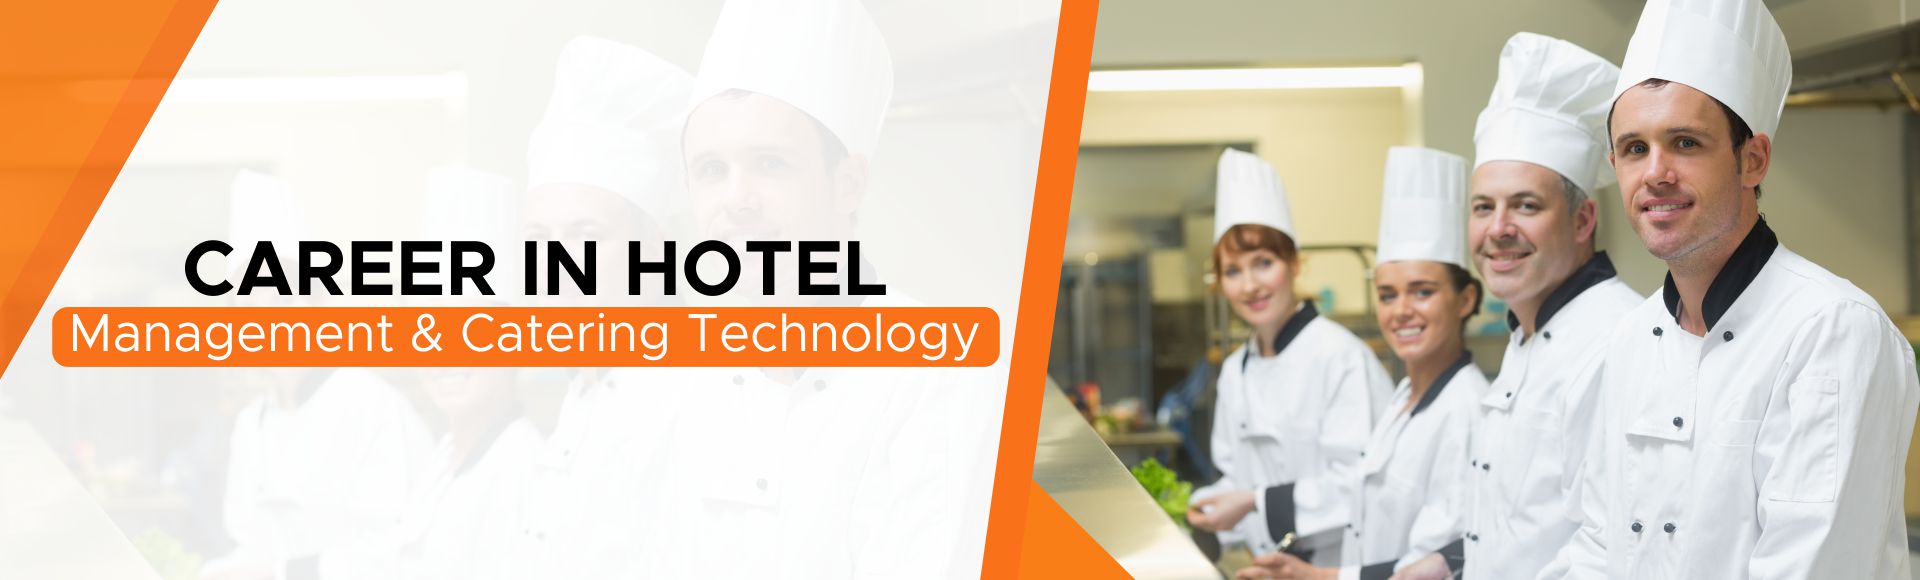 Hotel Management & Catering Technology Course Image